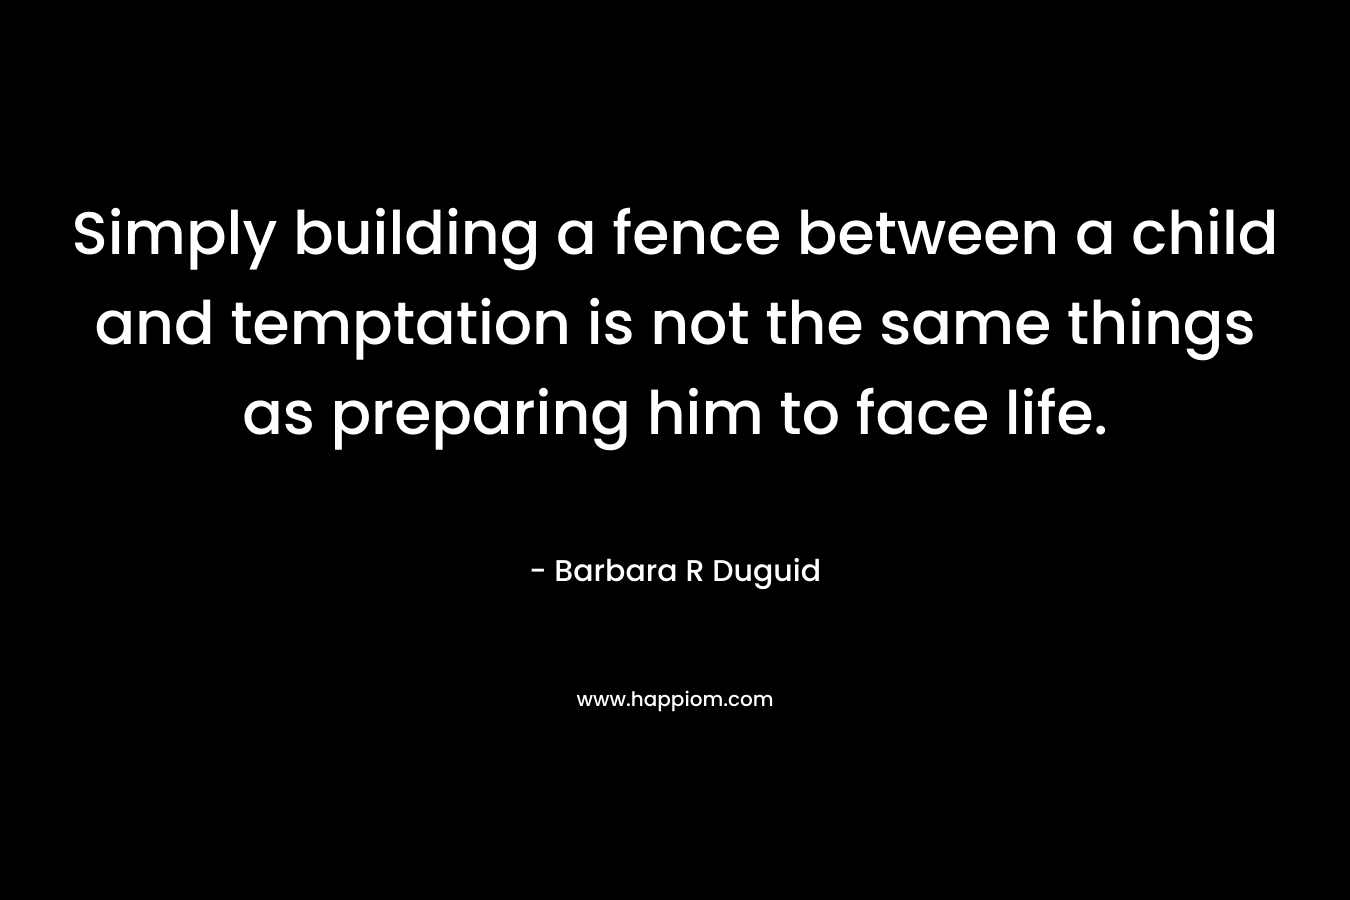 Simply building a fence between a child and temptation is not the same things as preparing him to face life.